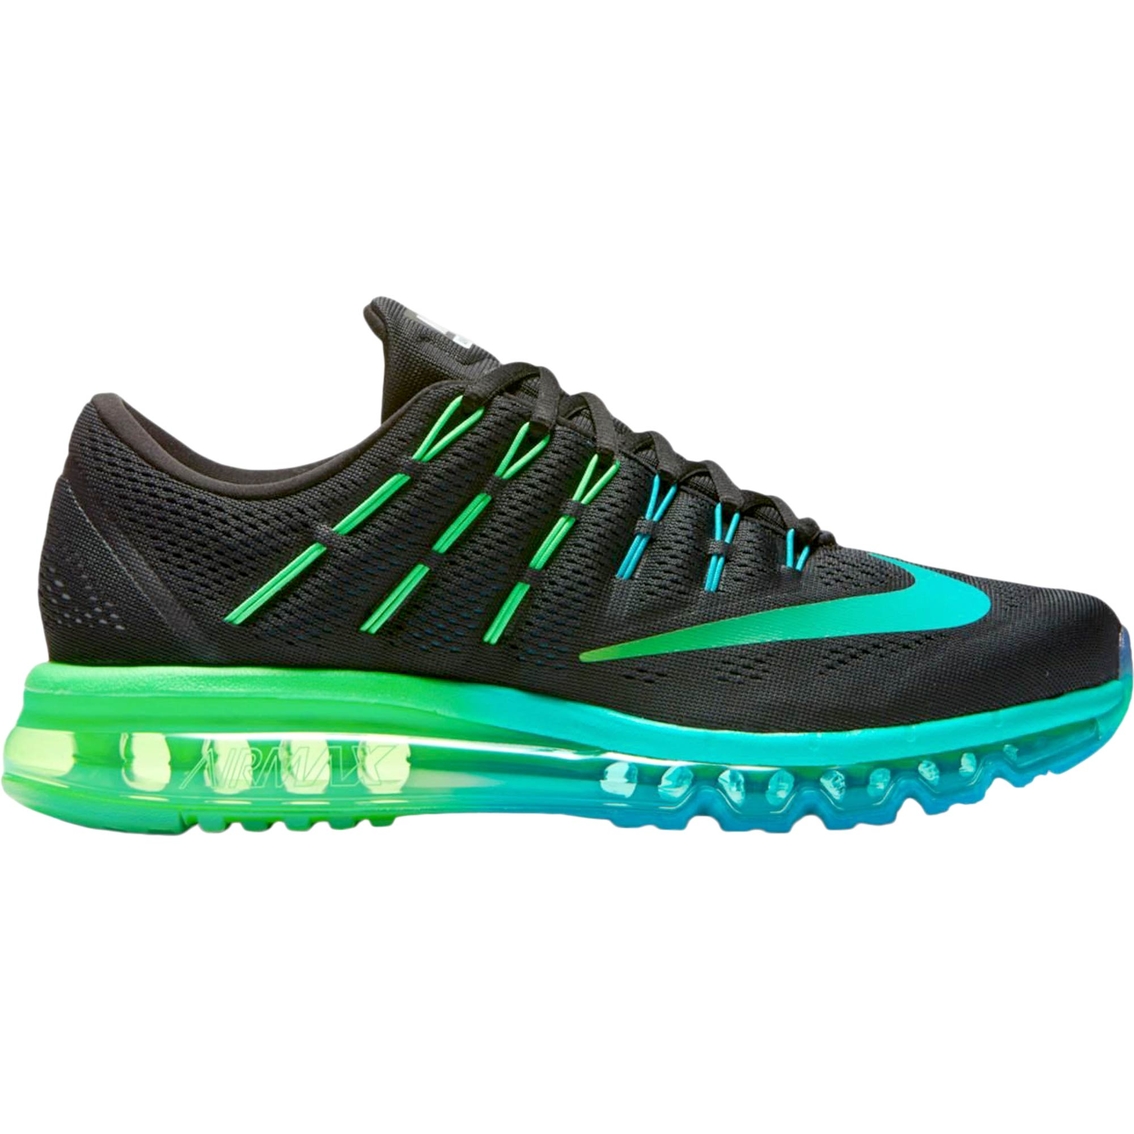 Nike Men's Air Max 2016 Running Shoes | Running | Shoes | Shop The Exchange